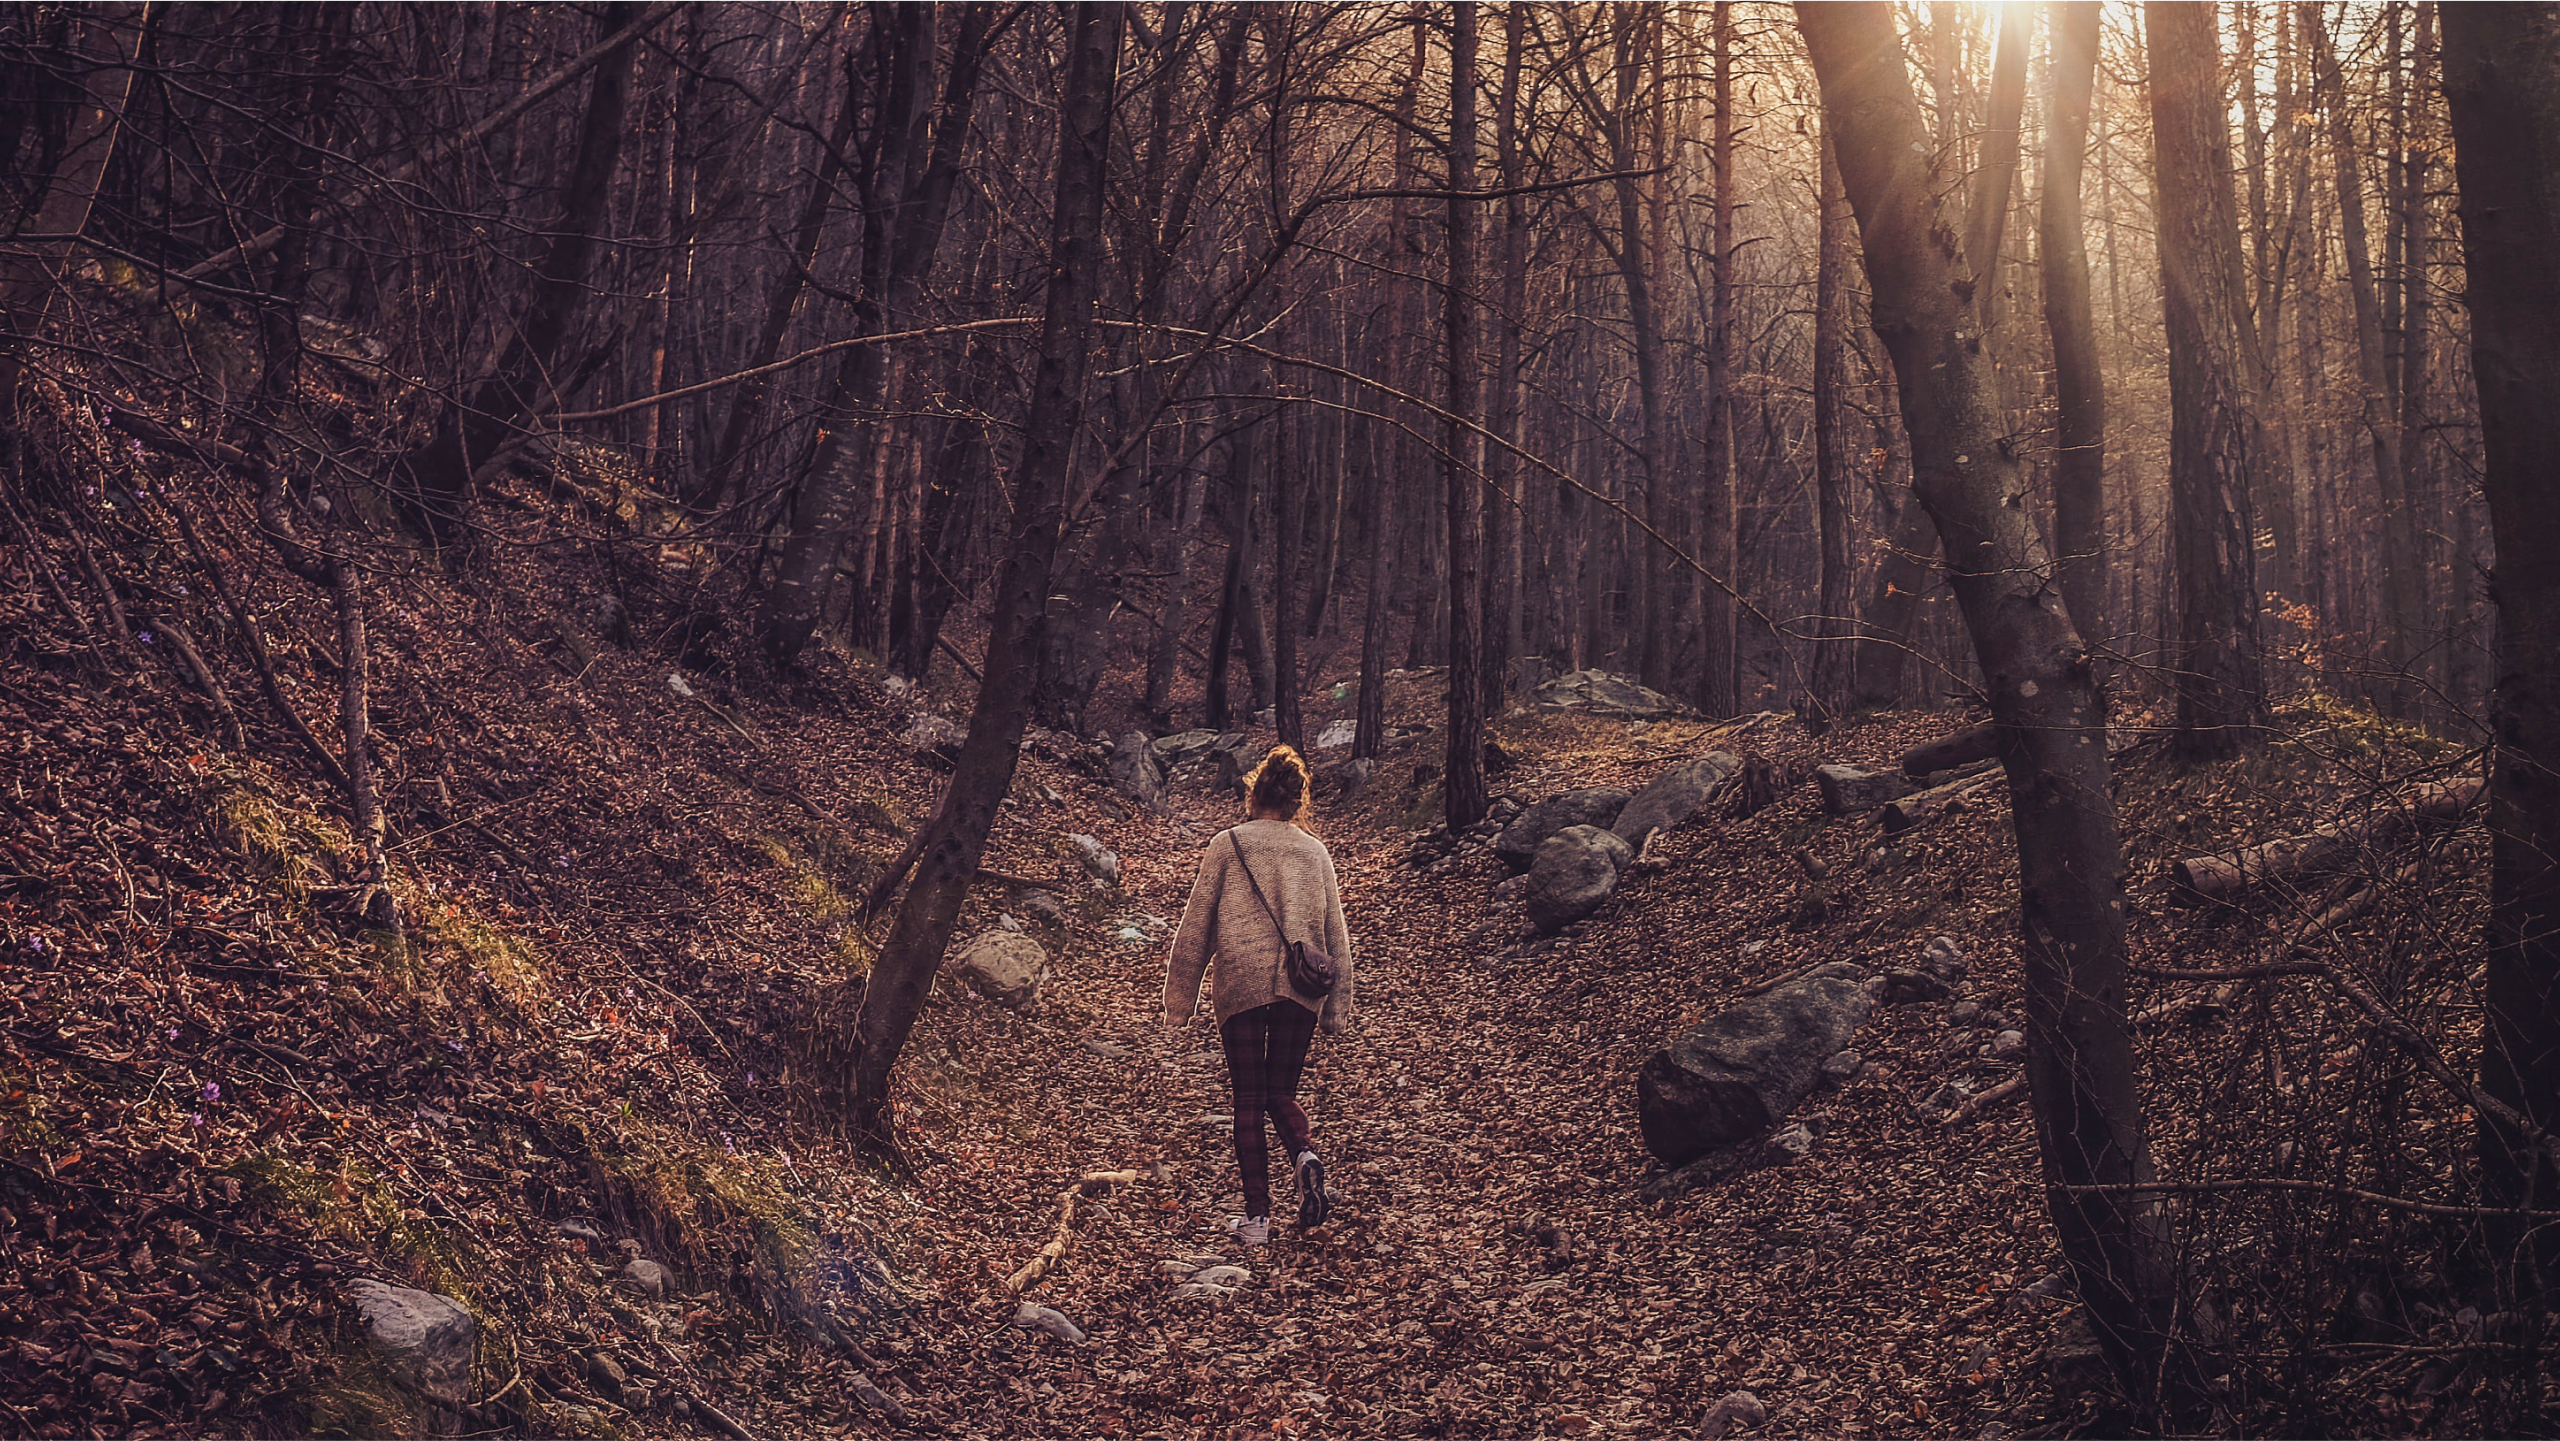 Exploring in the woods and spending time in nature is good for your mental wellbeing.